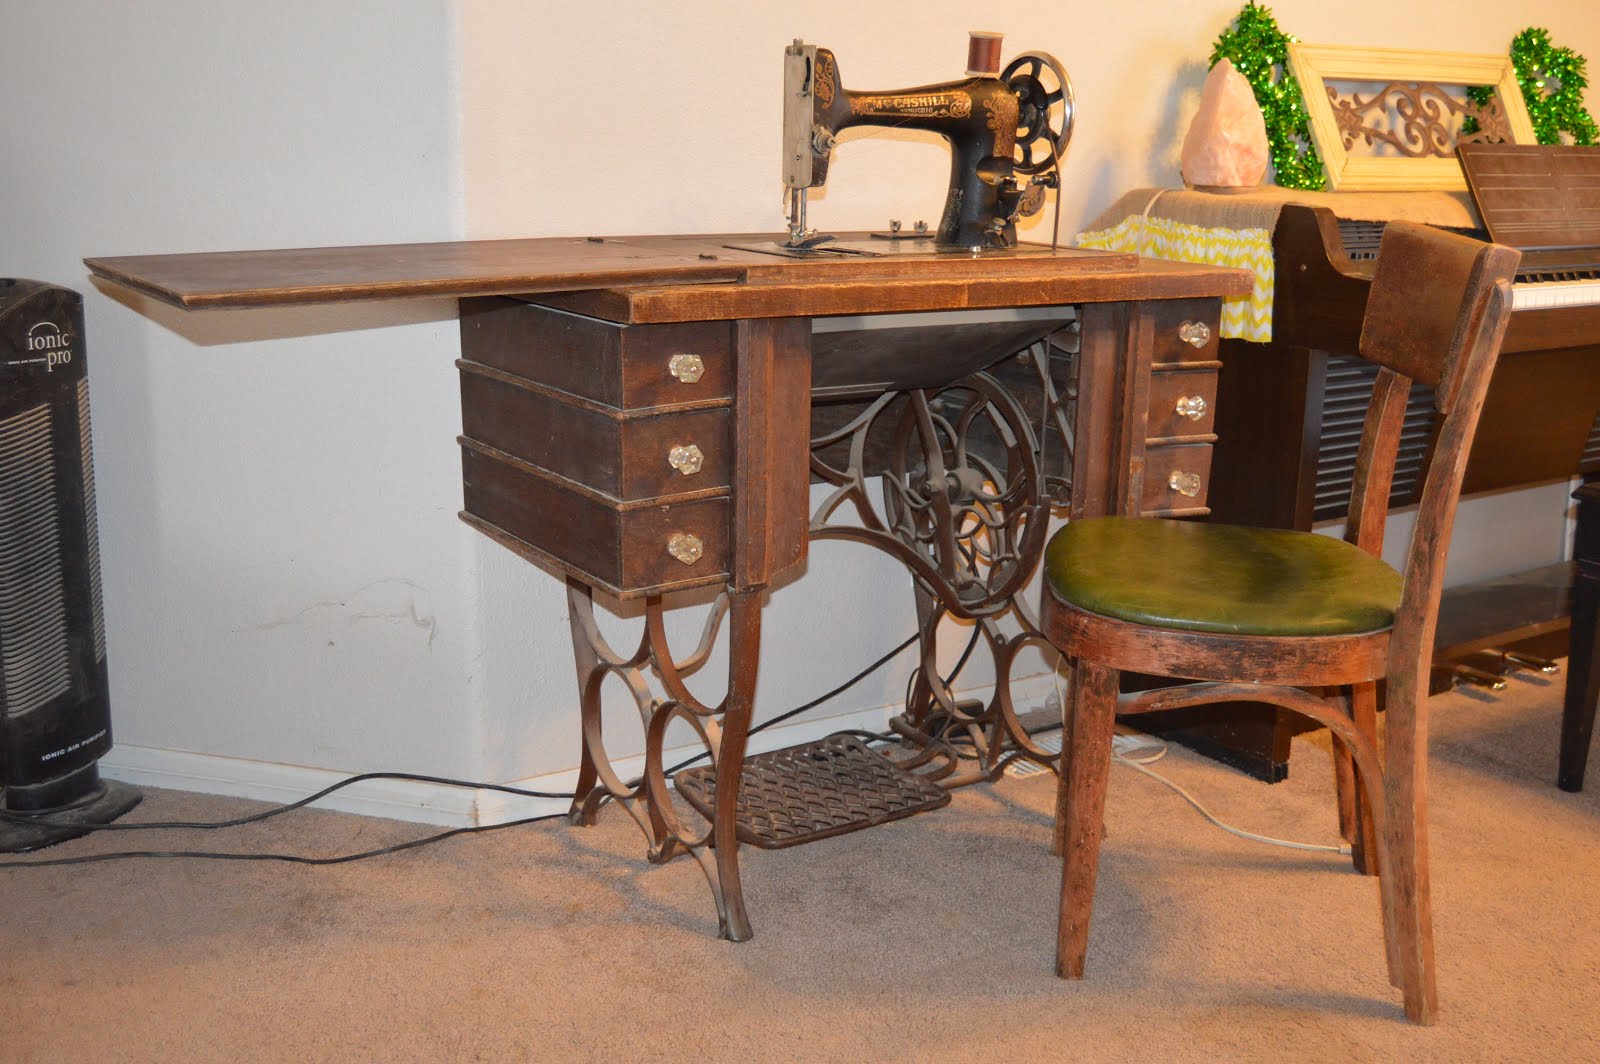 Antique sewing machine and chair $sold